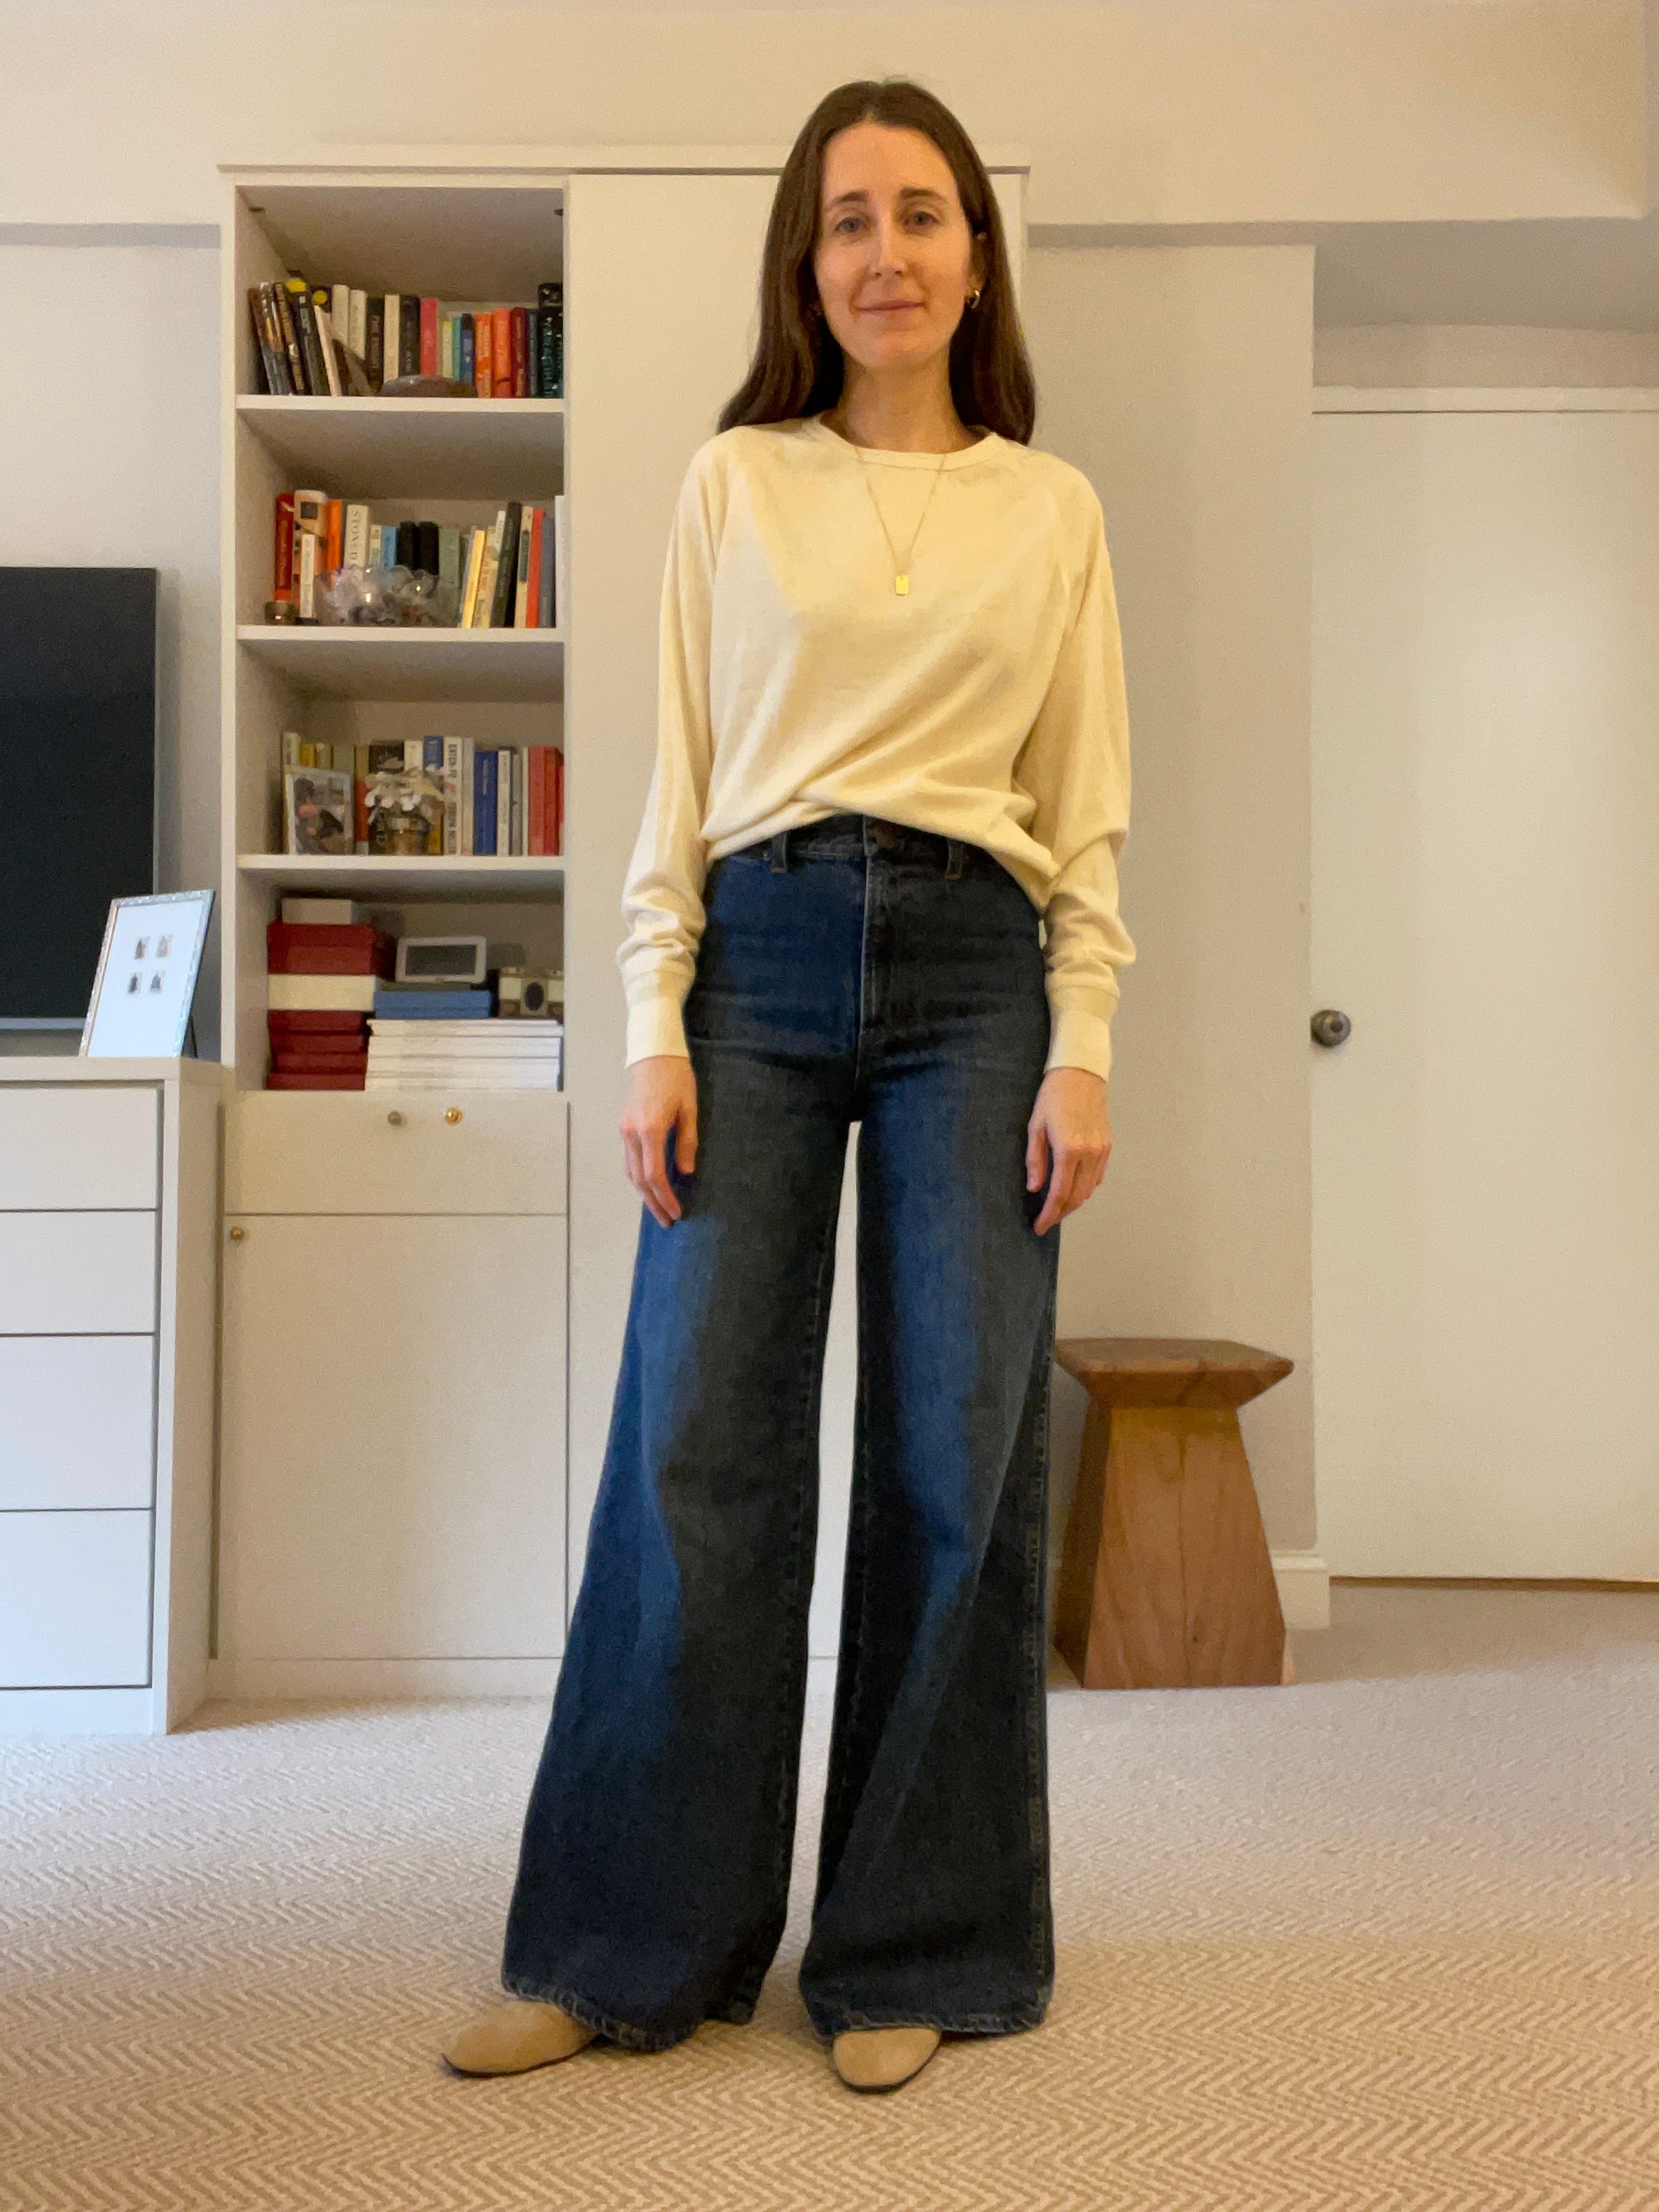 On becoming a wide leg jean person - by Becky Malinsky